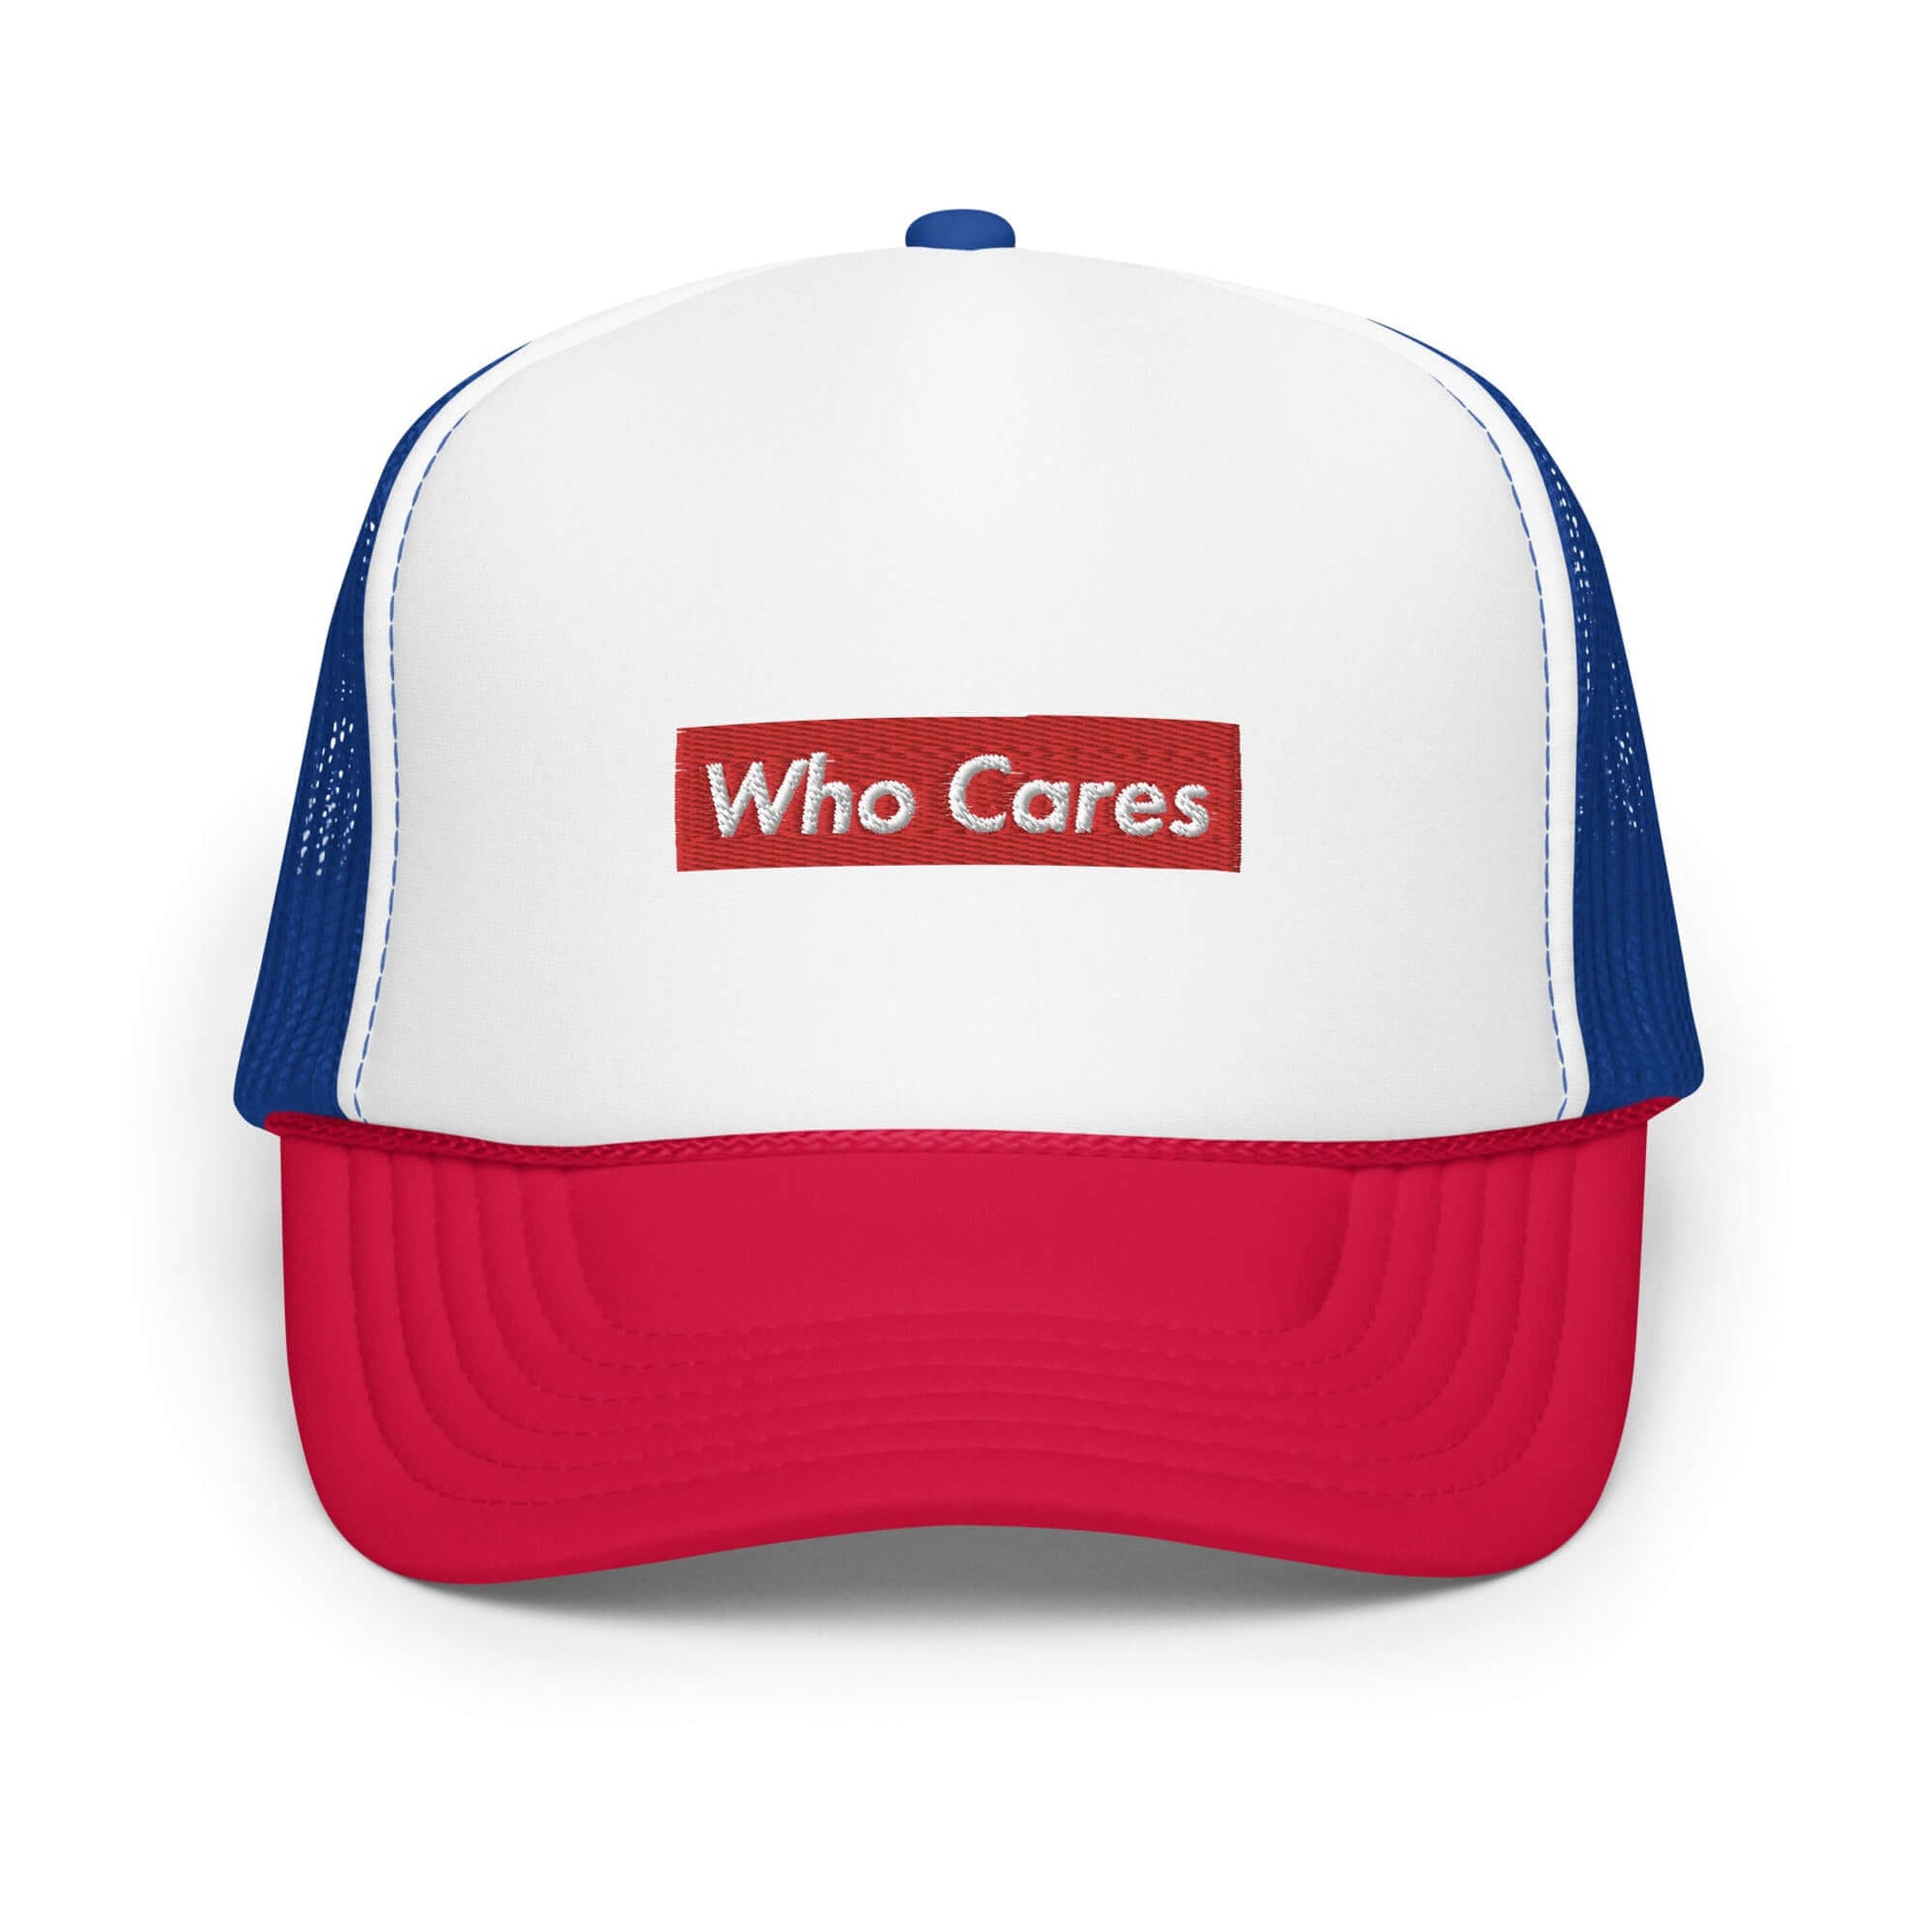 Who Cares Foam trucker hat White / Royal / Red